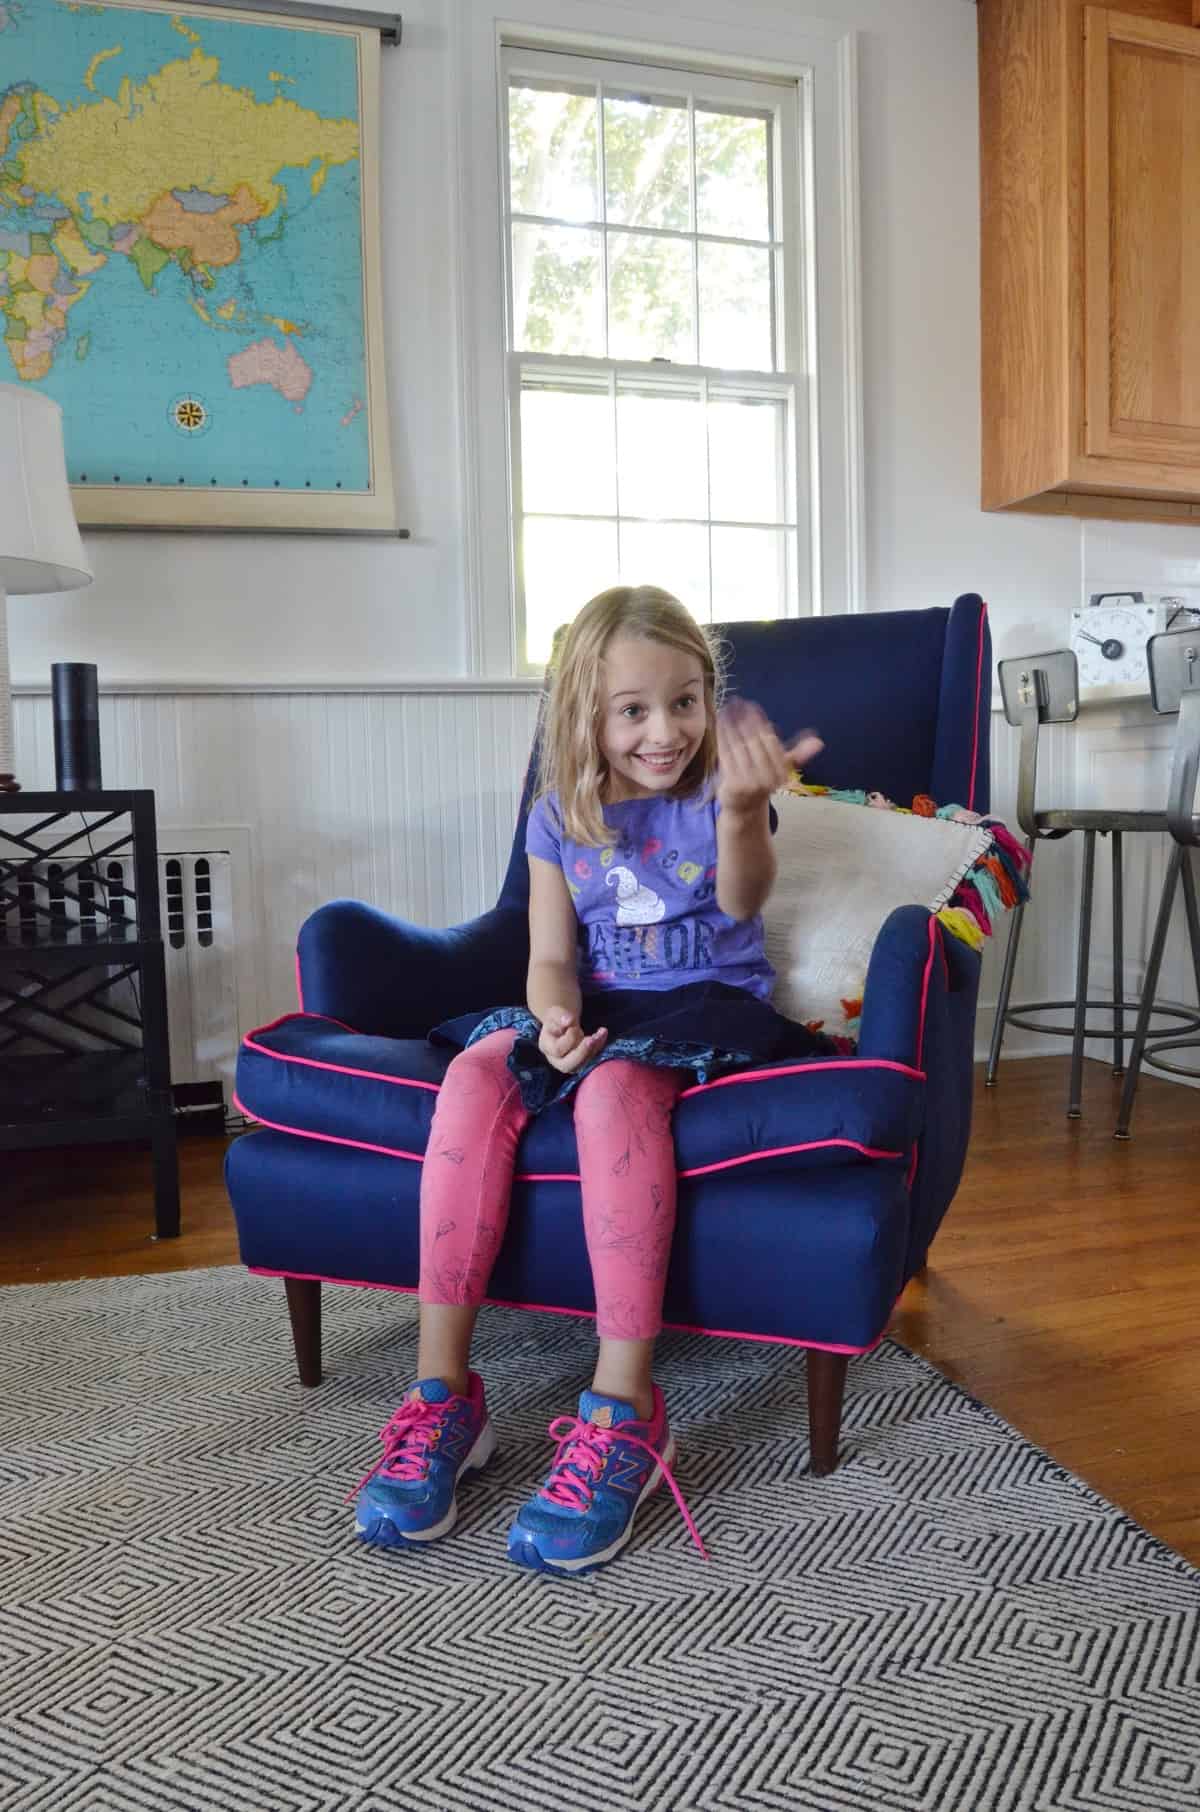 Step by step tutorial for upholstering an armchair.